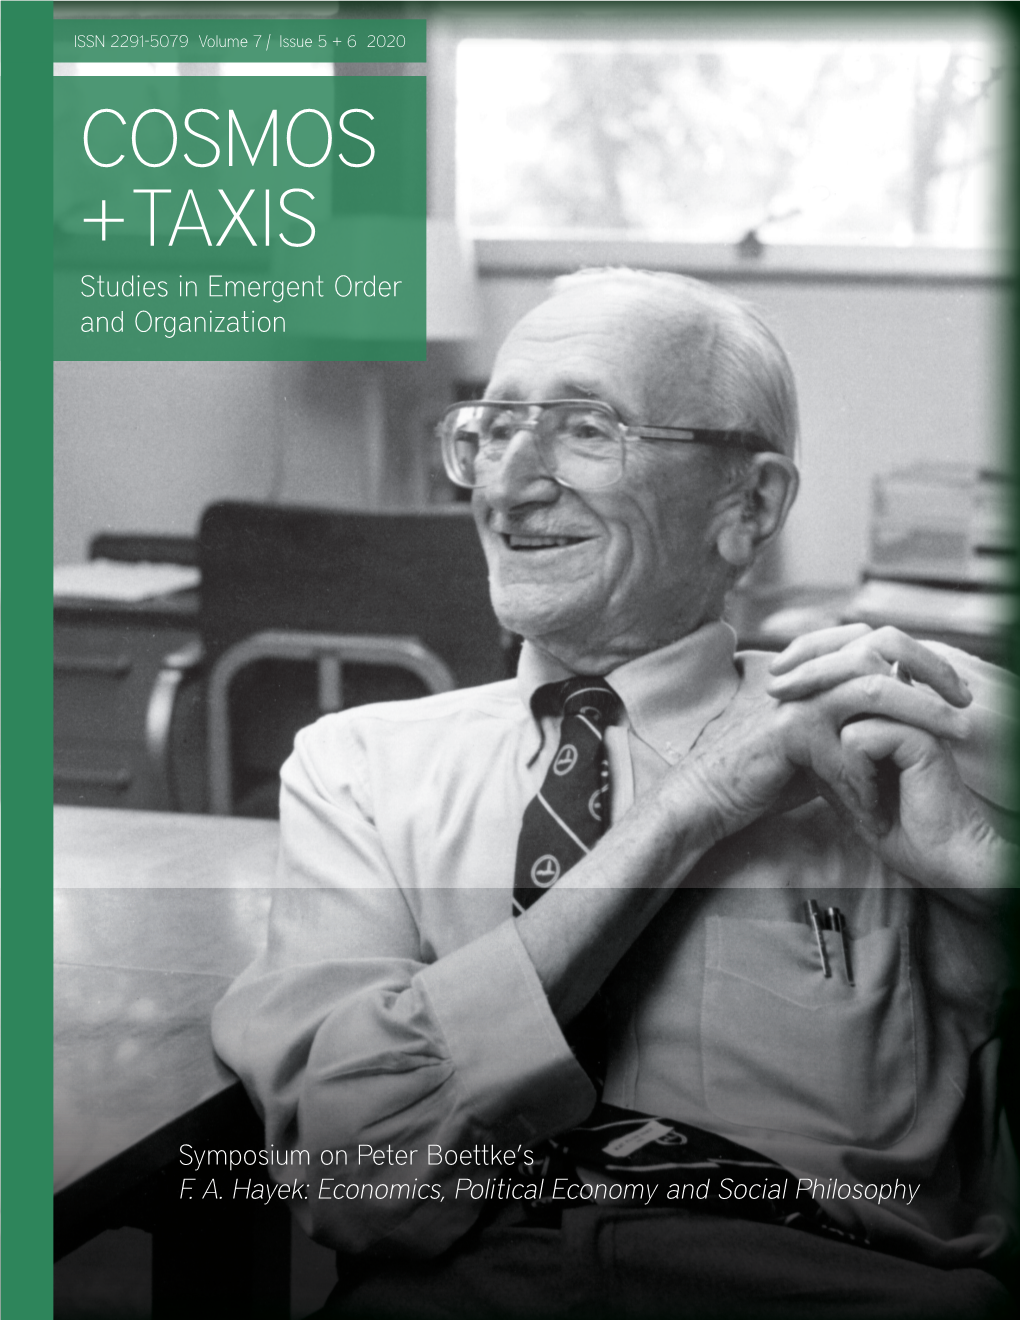 COSMOS + TAXIS | Volume 7 Issue 5 + 6 2020